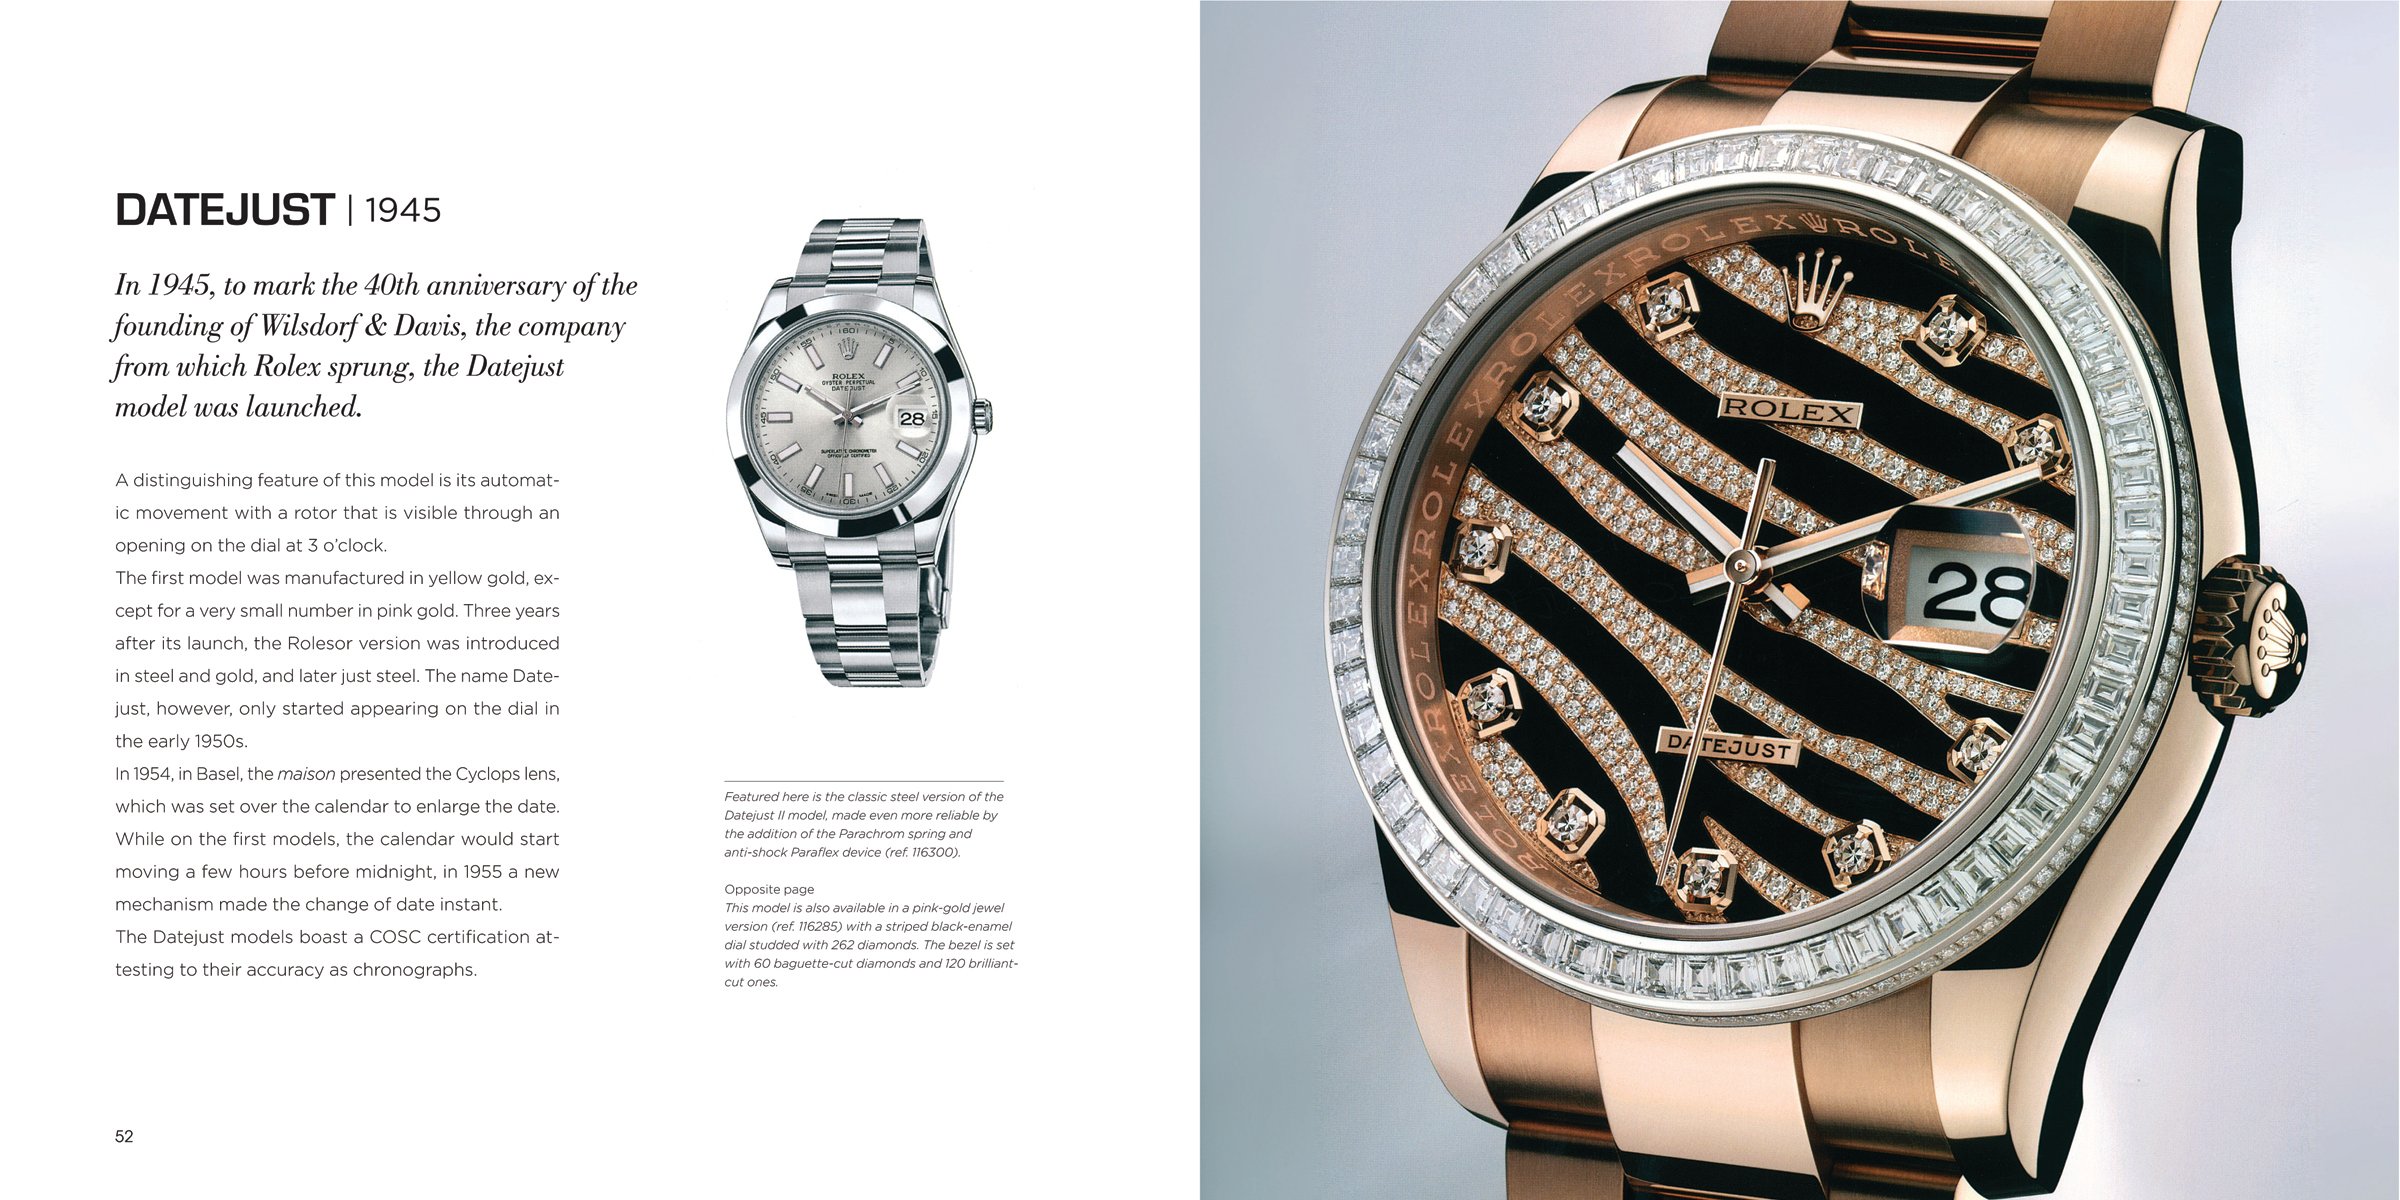 Silver Rolex oyster watch, with black face, on white cover, ROLEX HISTORY, ICONS AND RECORD-BREAKING MODELS in gold and silver font to centre right.